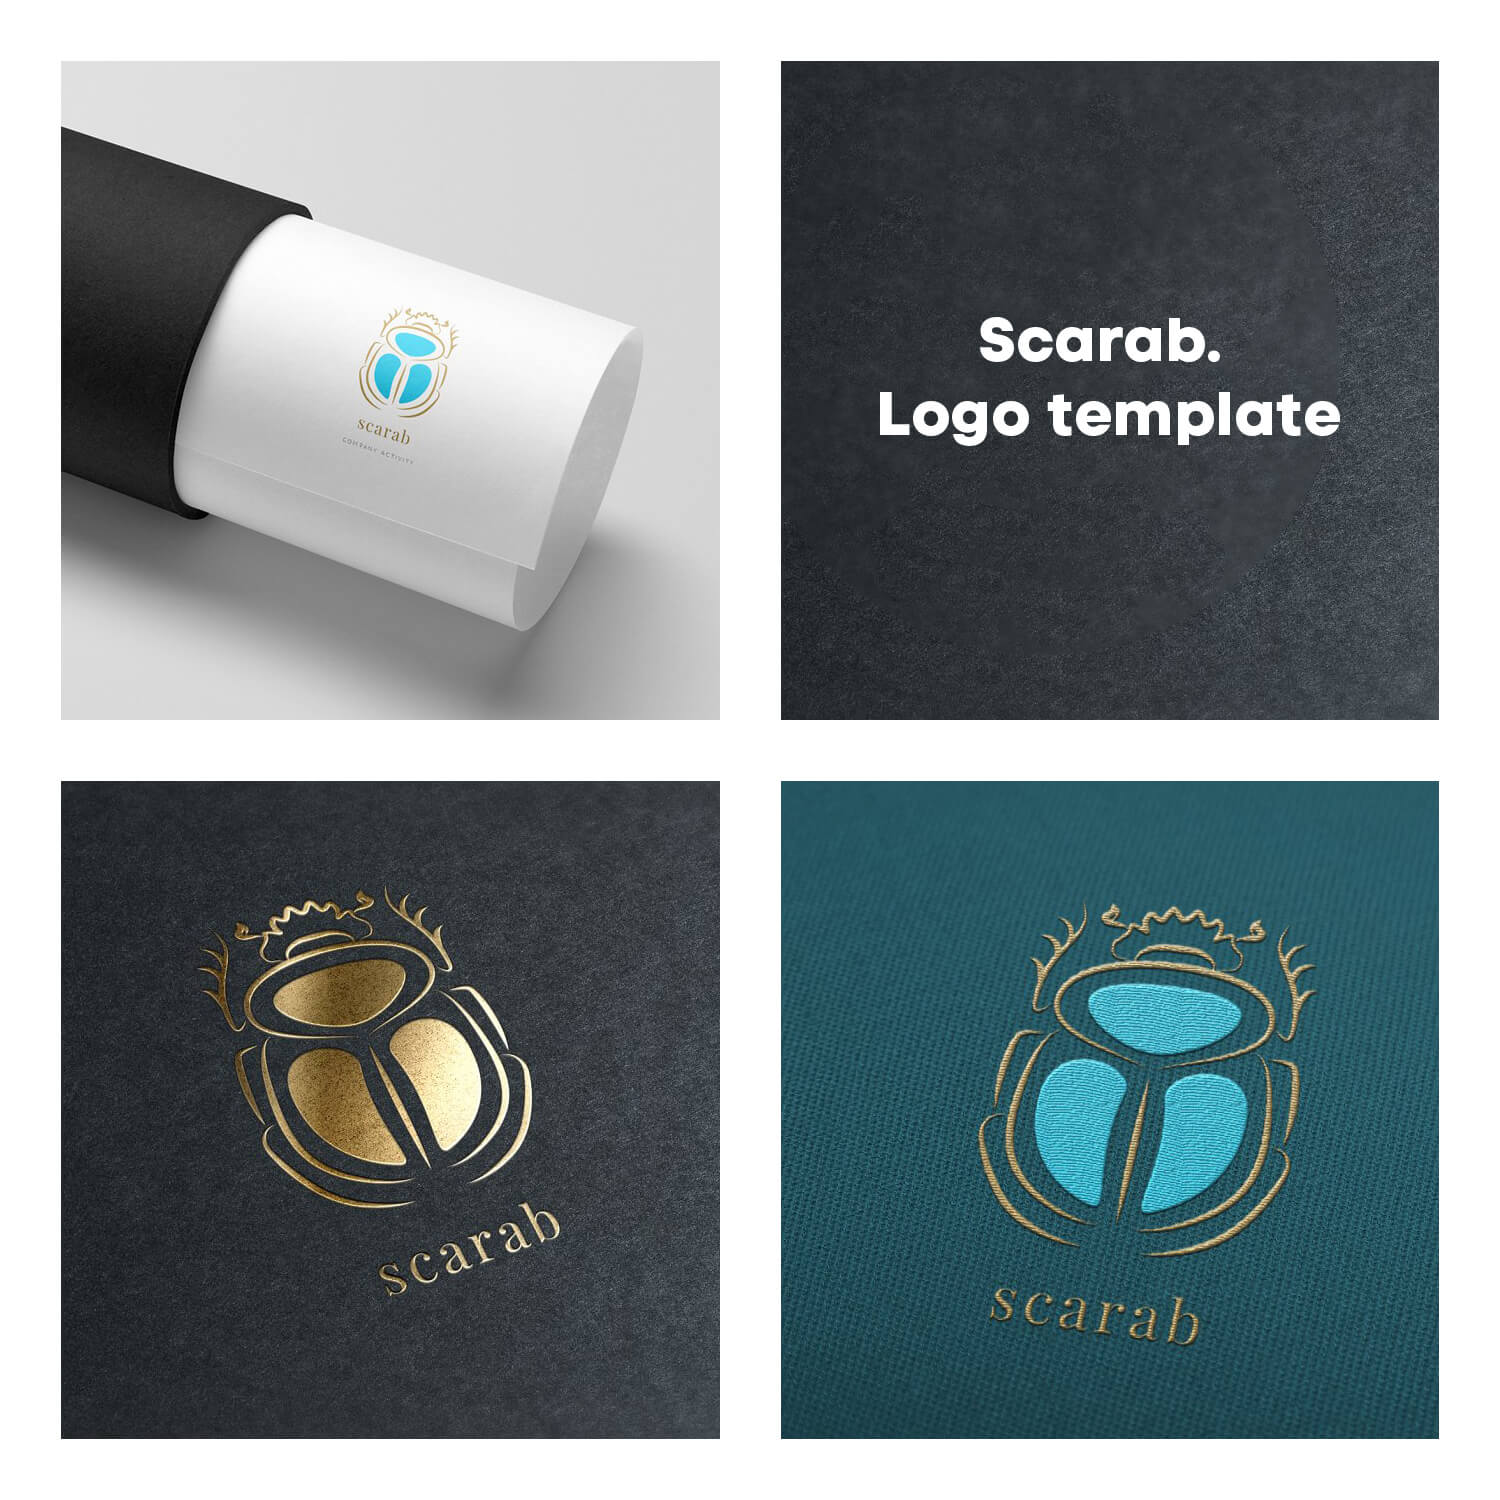 High-quality image of the scarab logo on light and dark backgrounds.